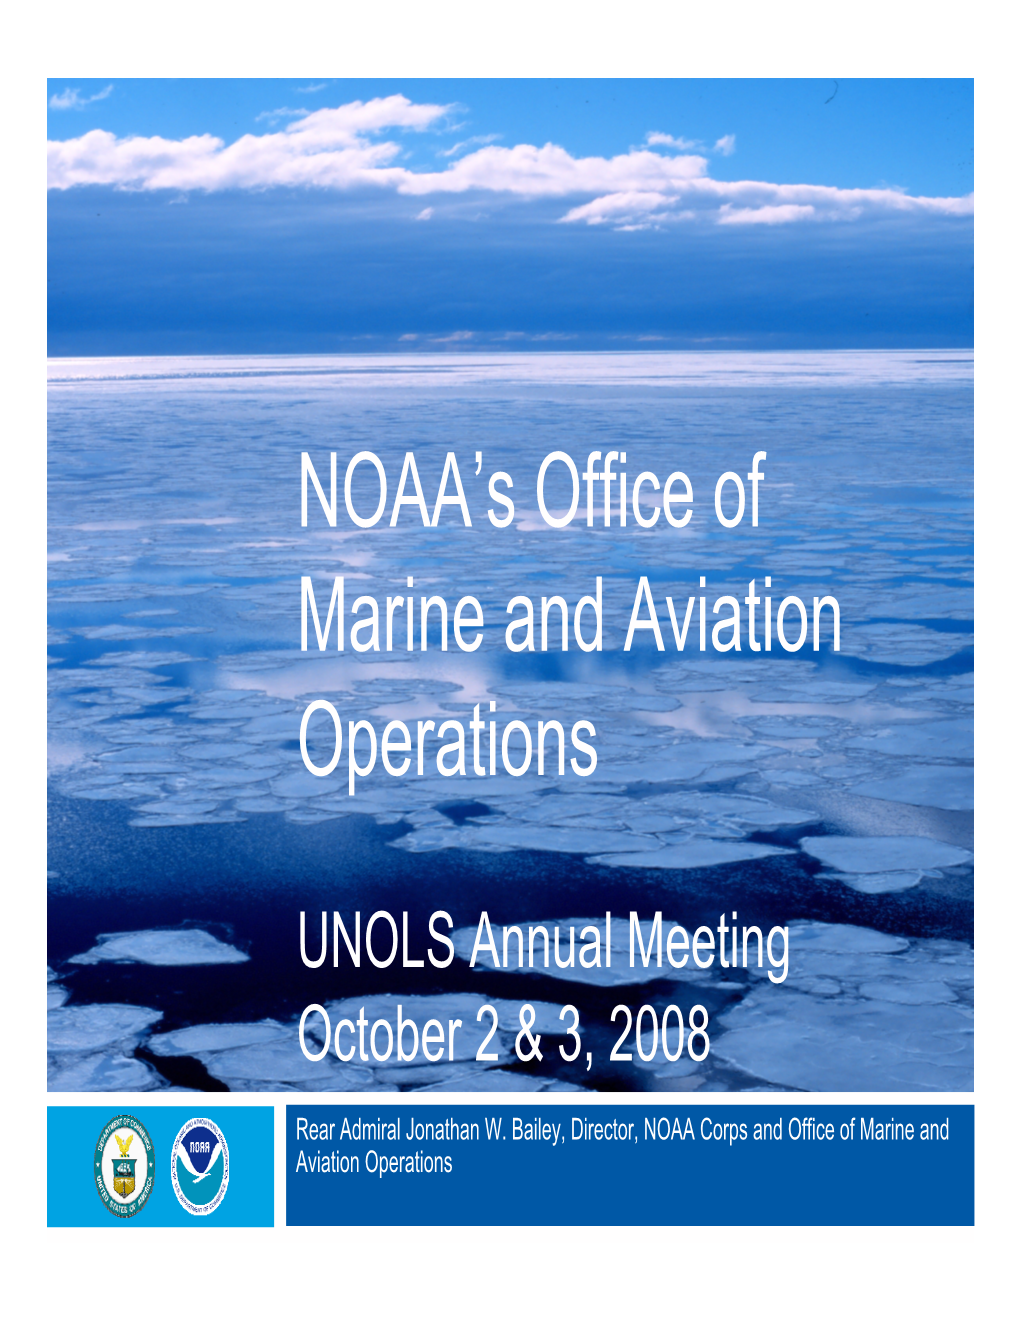 NOAA's Office of Marine and Aviation Operations